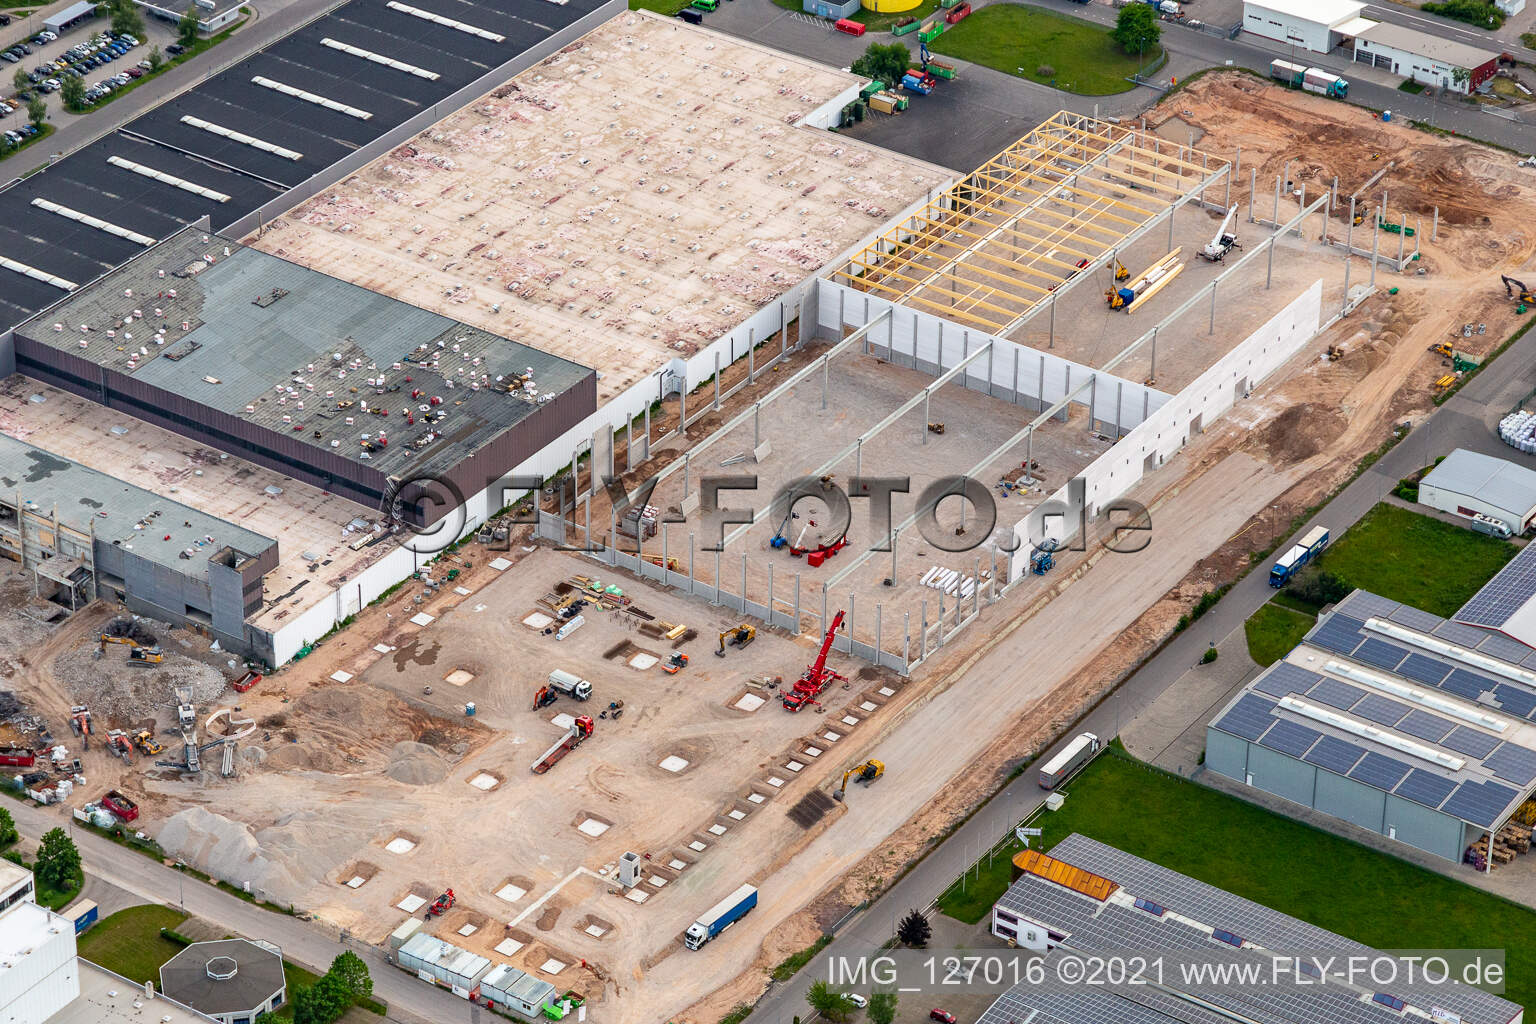 Aerial view of Construction site for a warehouse and forwarding building of Progroup Board GmbH im Interpark in Offenbach an der Queich in the state Rhineland-Palatinate, Germany